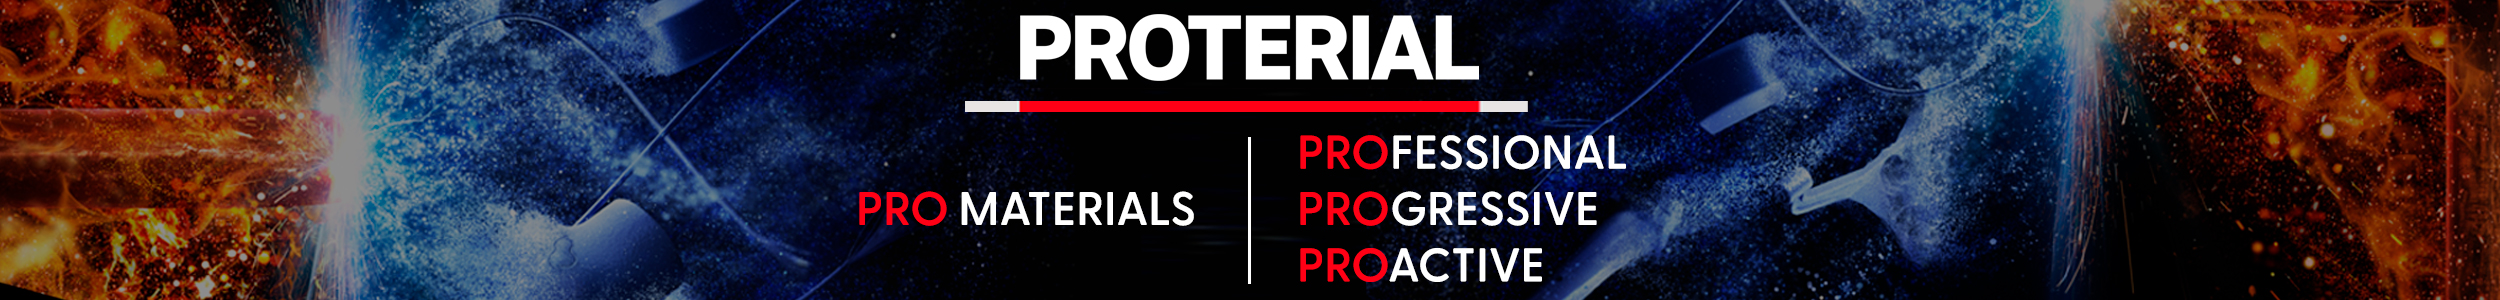 Proterial Homepage Banner